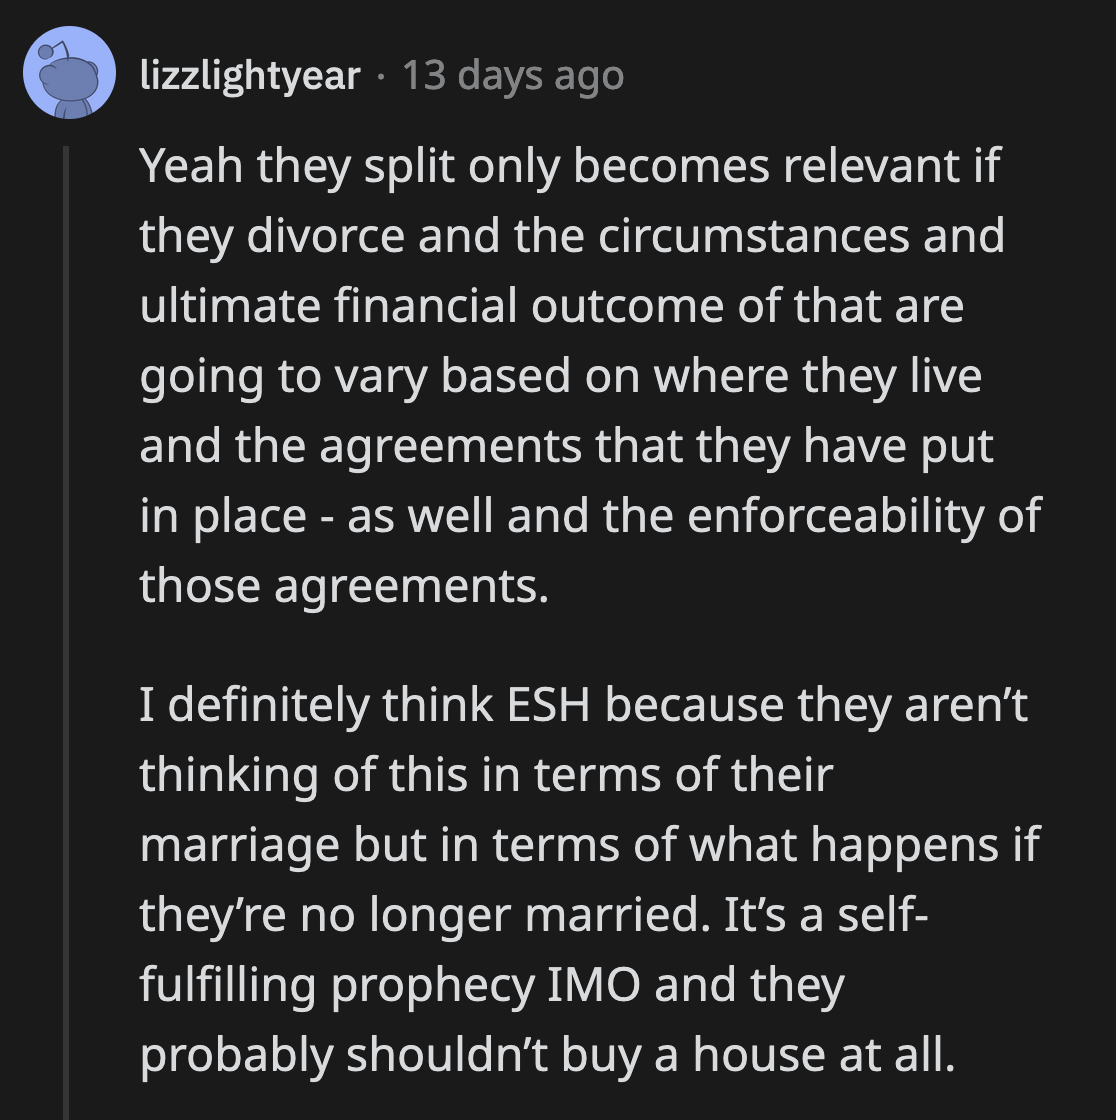 Redditors couldn't help but speculate how long OP's marriage would last.